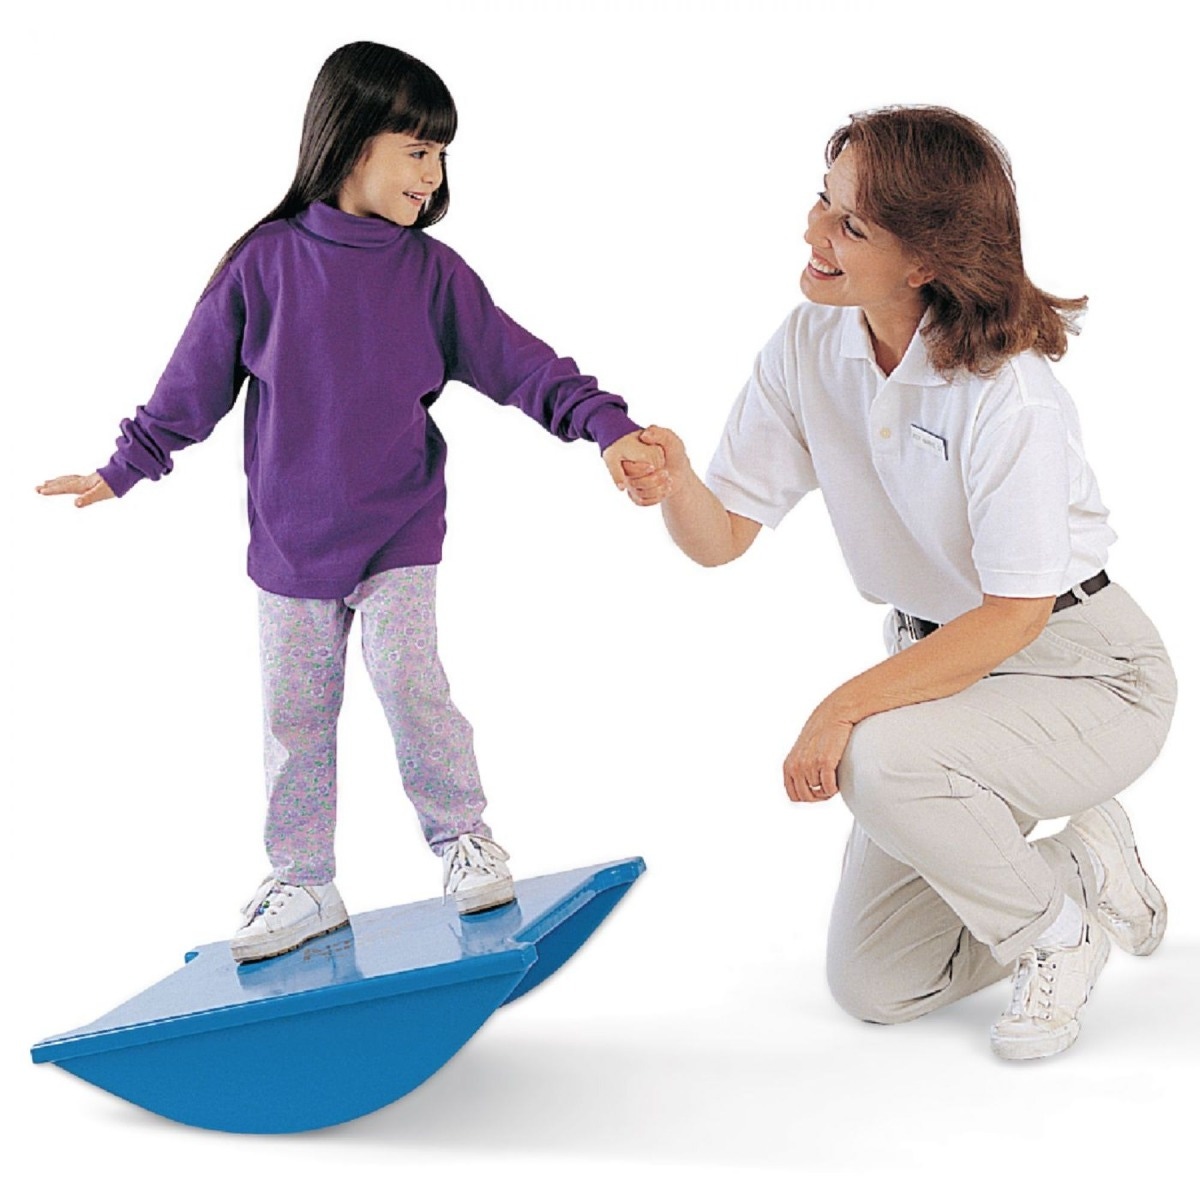 Physiotherapist holding onto happy child's hand to support the child while they balance on a blue rocker board